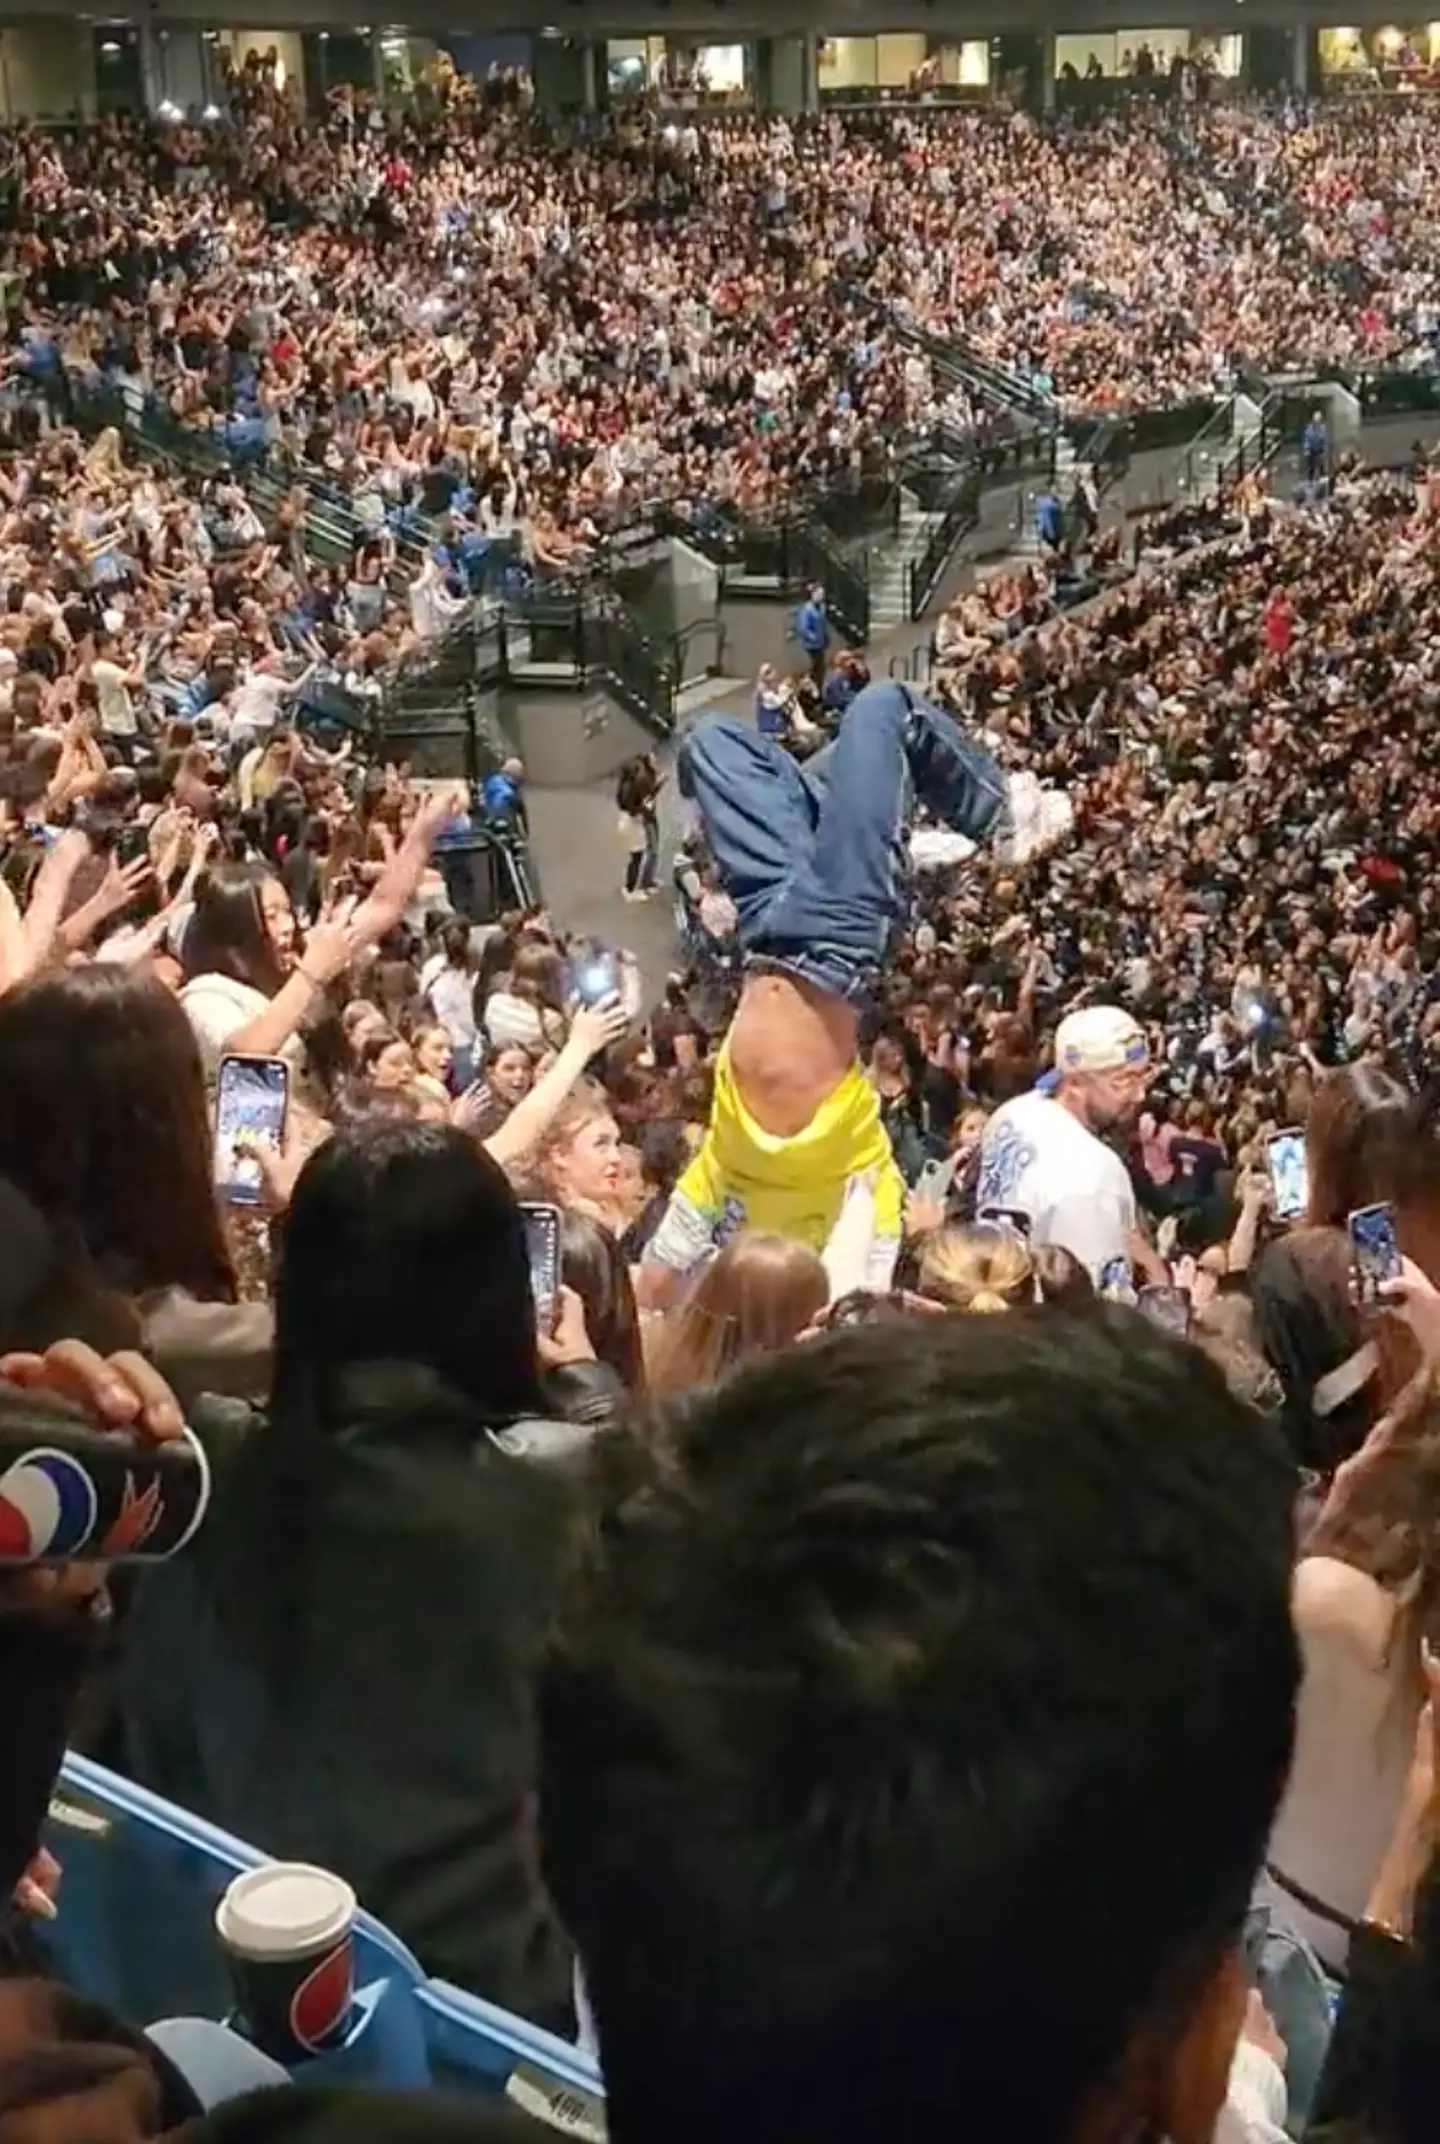 Fans were getting up to all sorts at the Melbourne gig (TikTok/@wetwater_)